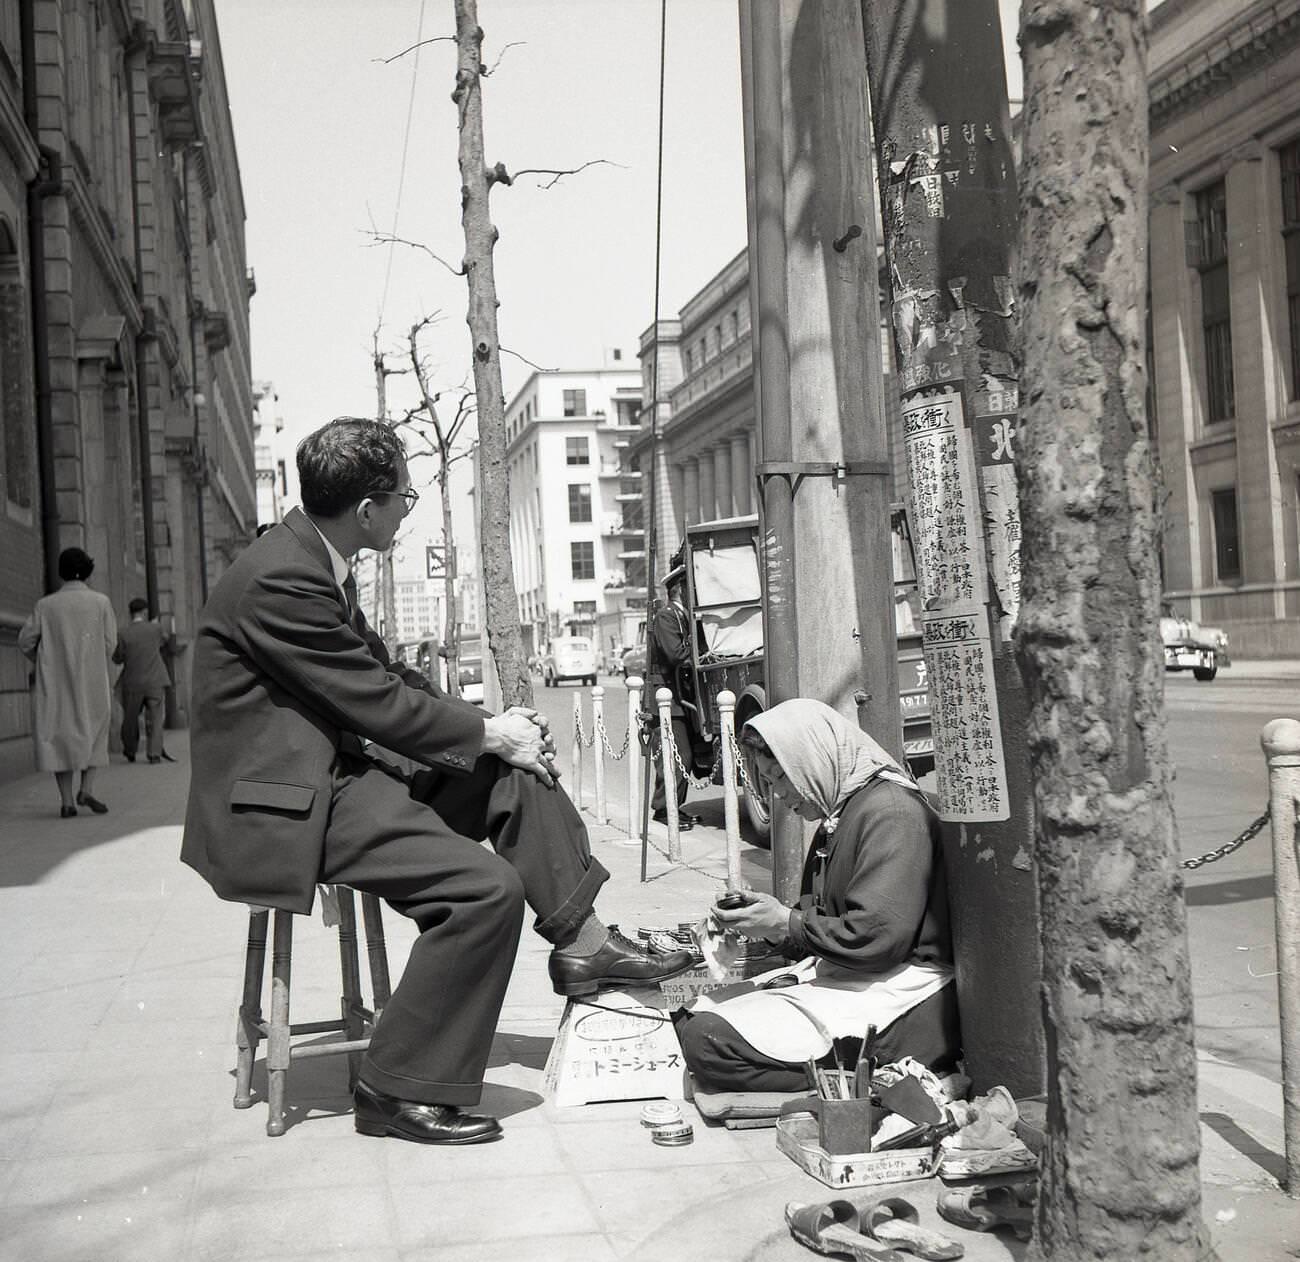 A Japanese businessman sitting outside on a stool having his shoes shined, 1950s.